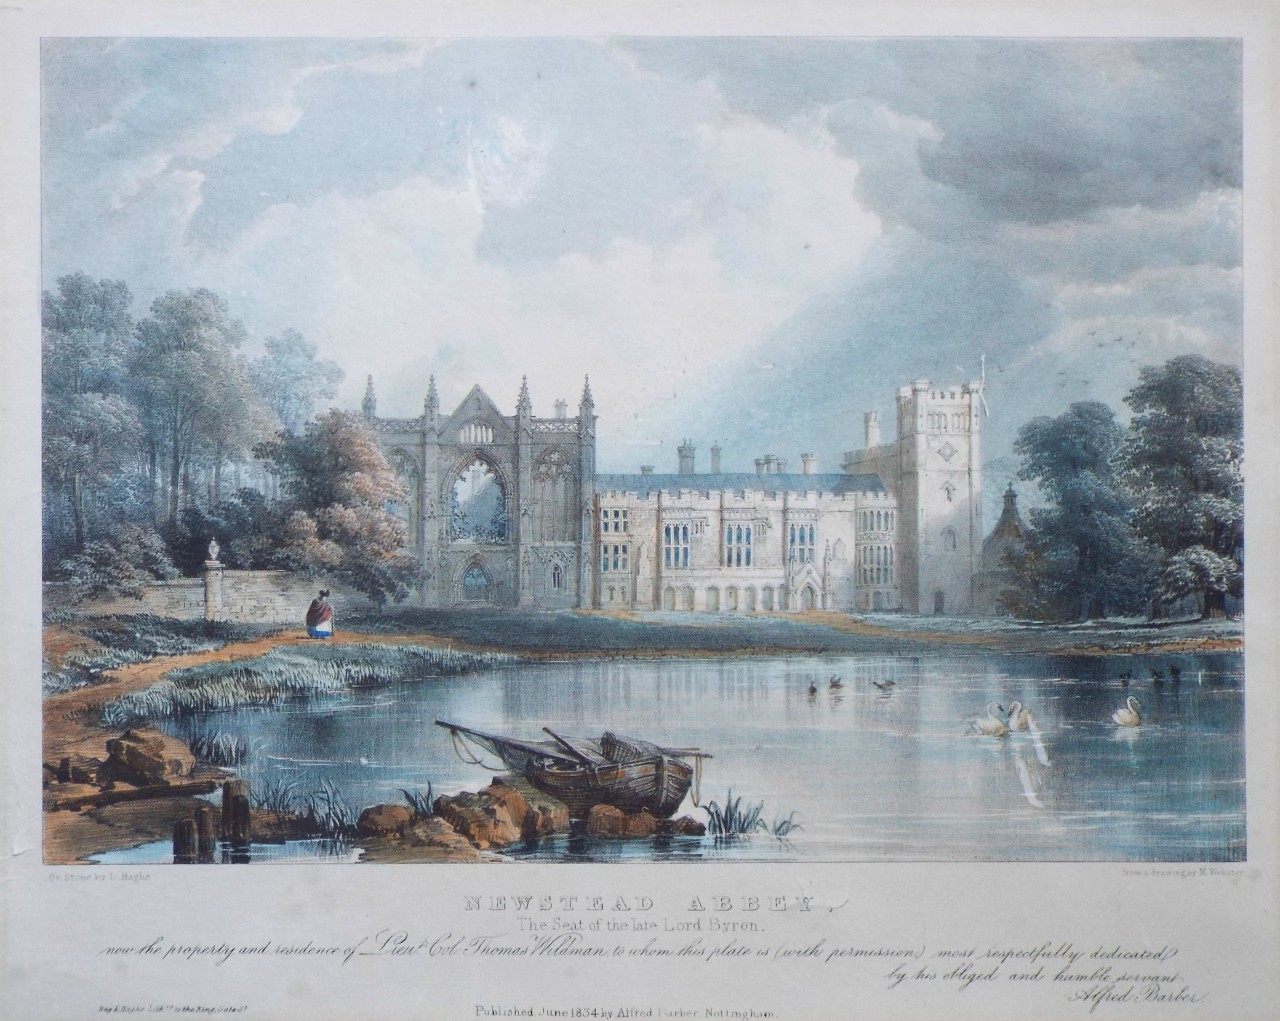 Lithograph - Newstead Abbey, The Seat of the late Lord Byron. - Haghe